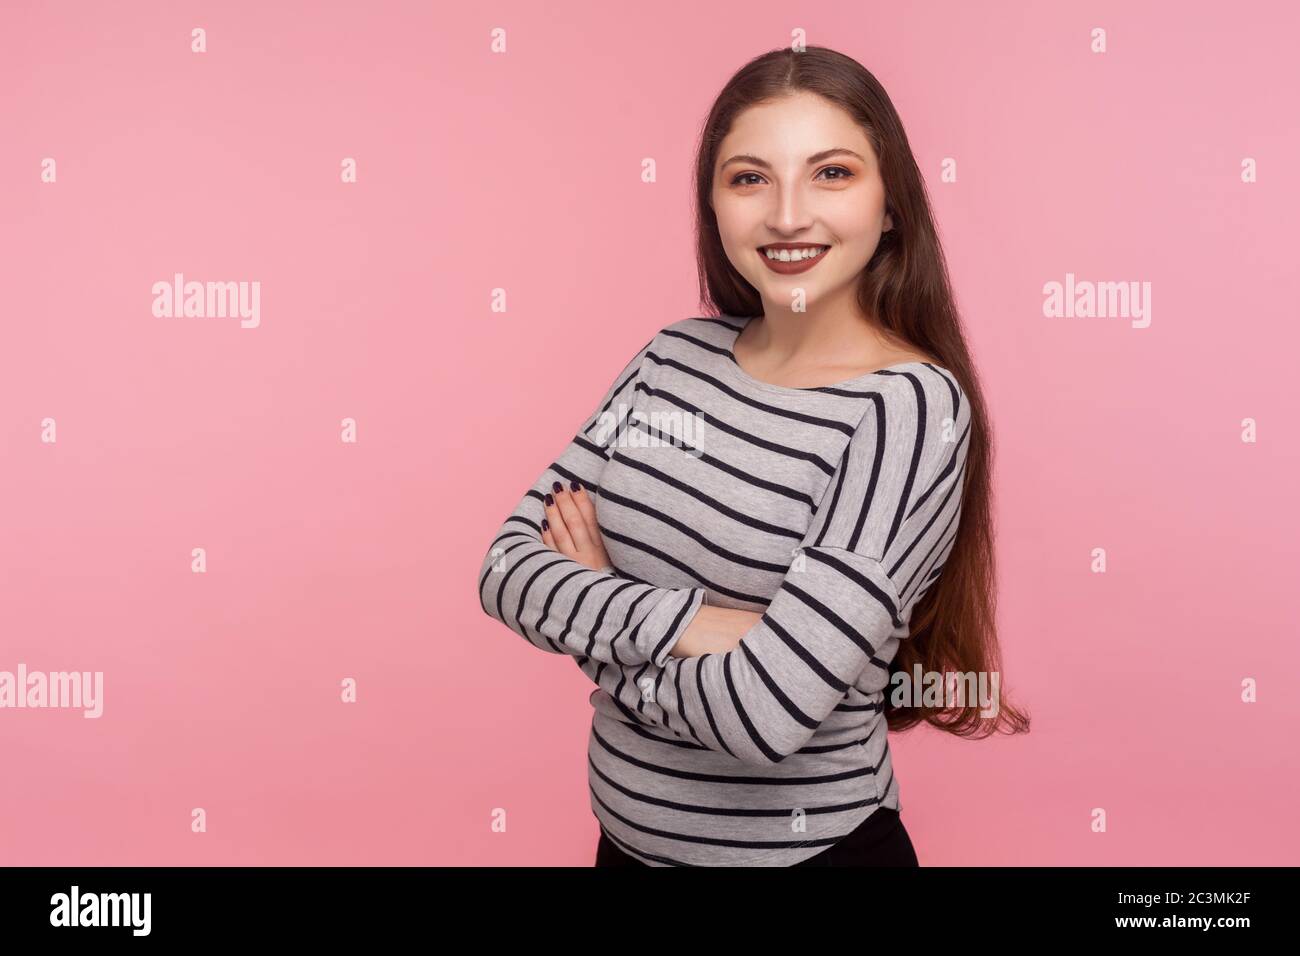 Portrait of joyful self-assured woman in striped sweatshirt looking at camera with toothy smile, crossing hands and feeling confident, satisfied with Stock Photo